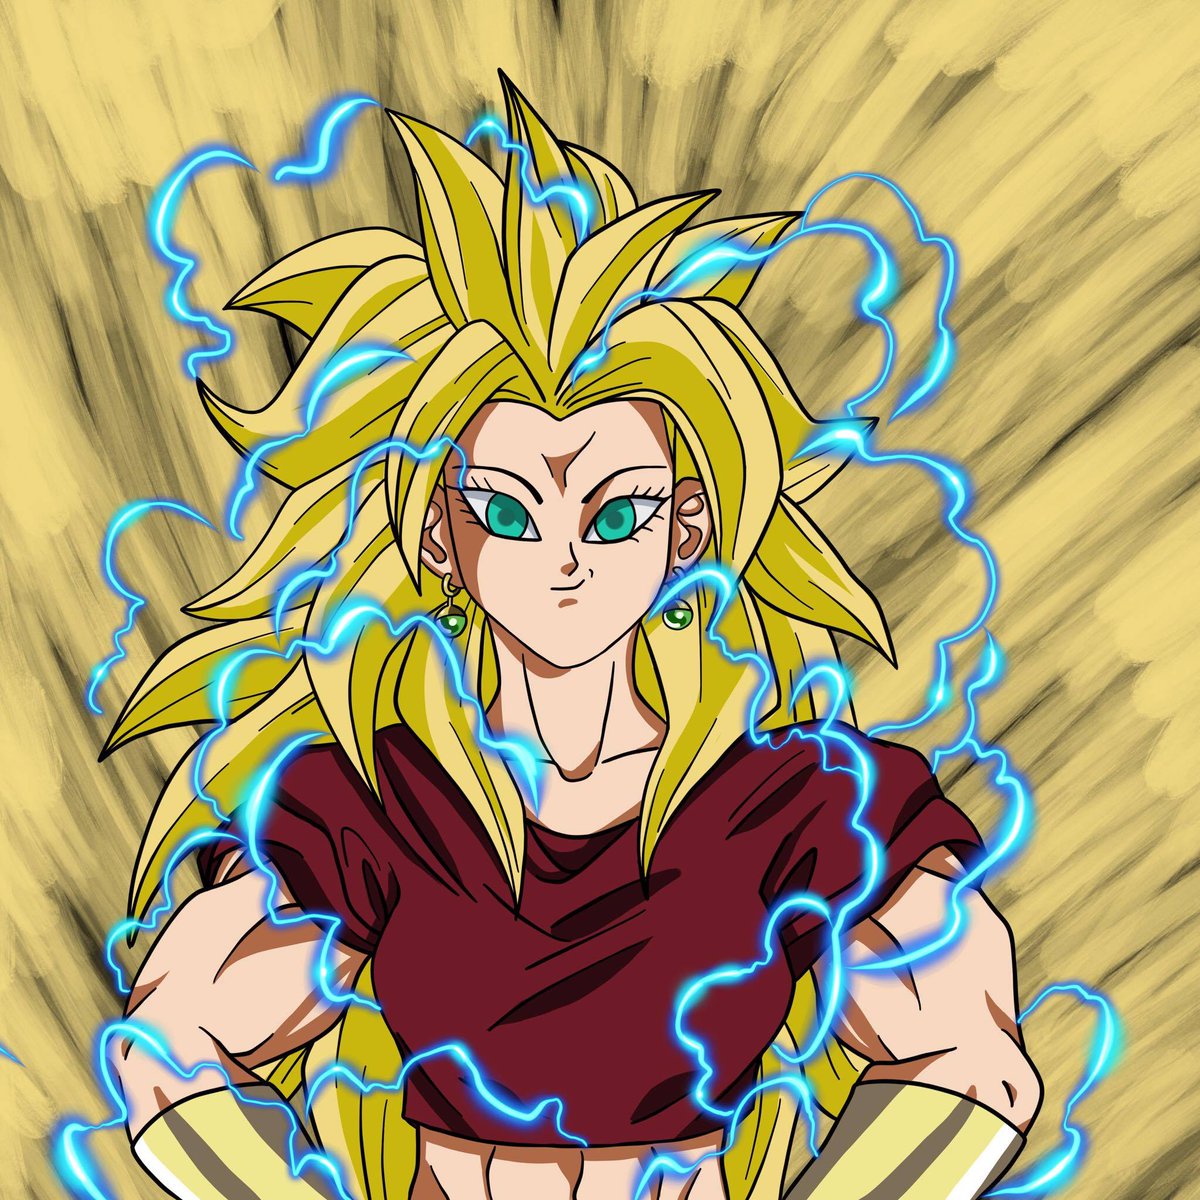 Now what if she unlocks SSJ3, she have already seen it, she know how to do ...